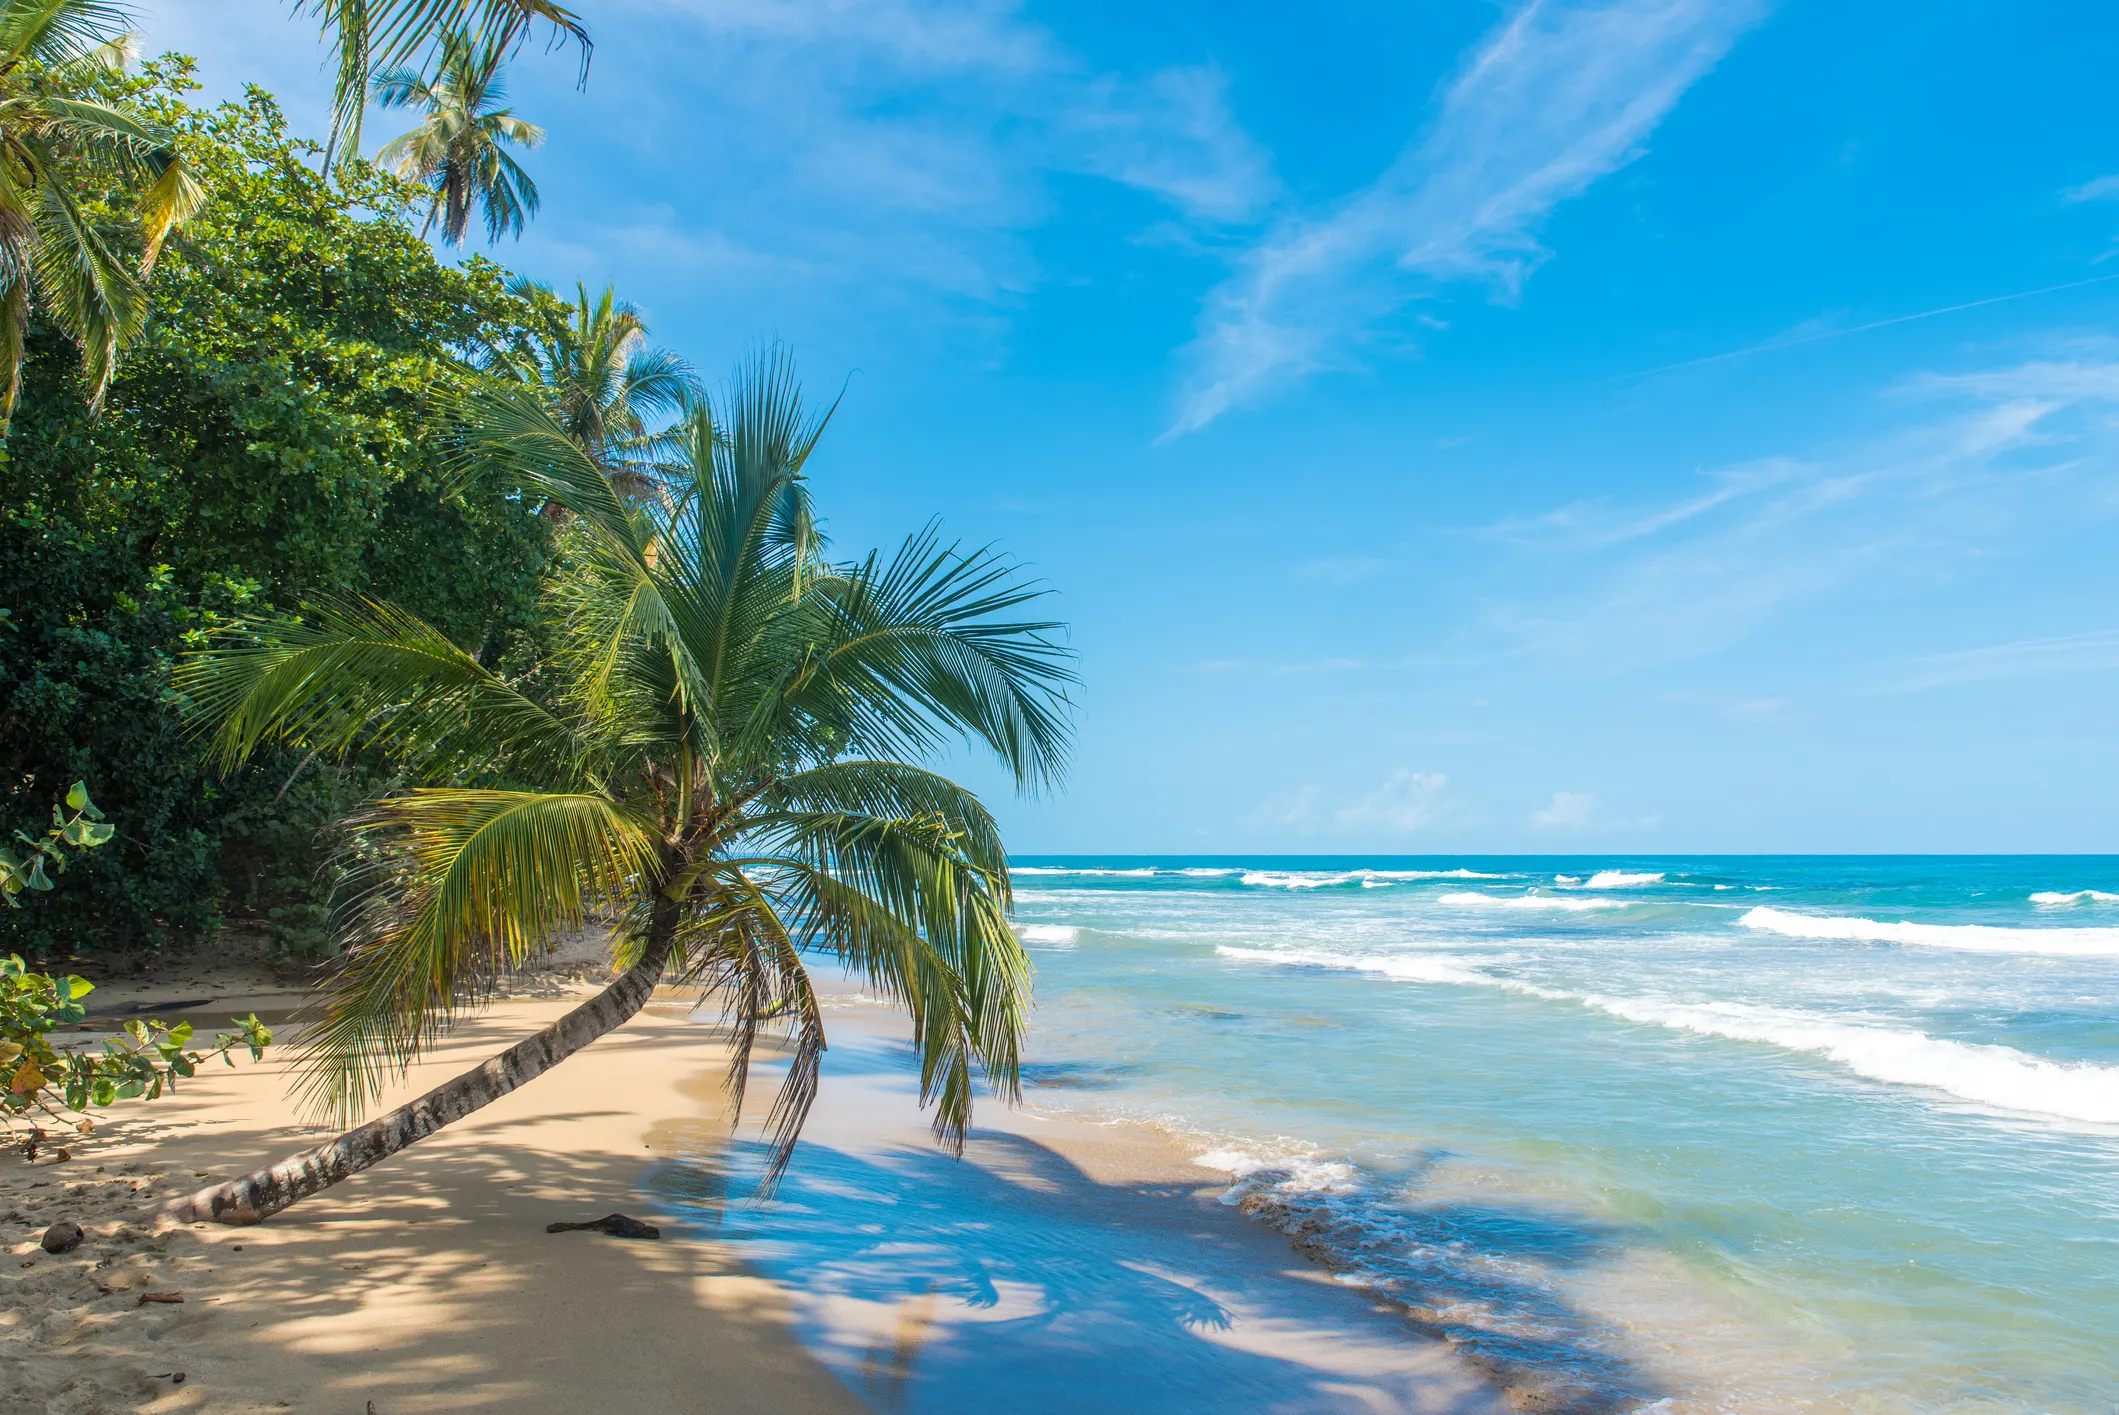 Costa Rica Country Guide - A Stable, Easy, and Affordable Retirement Gem